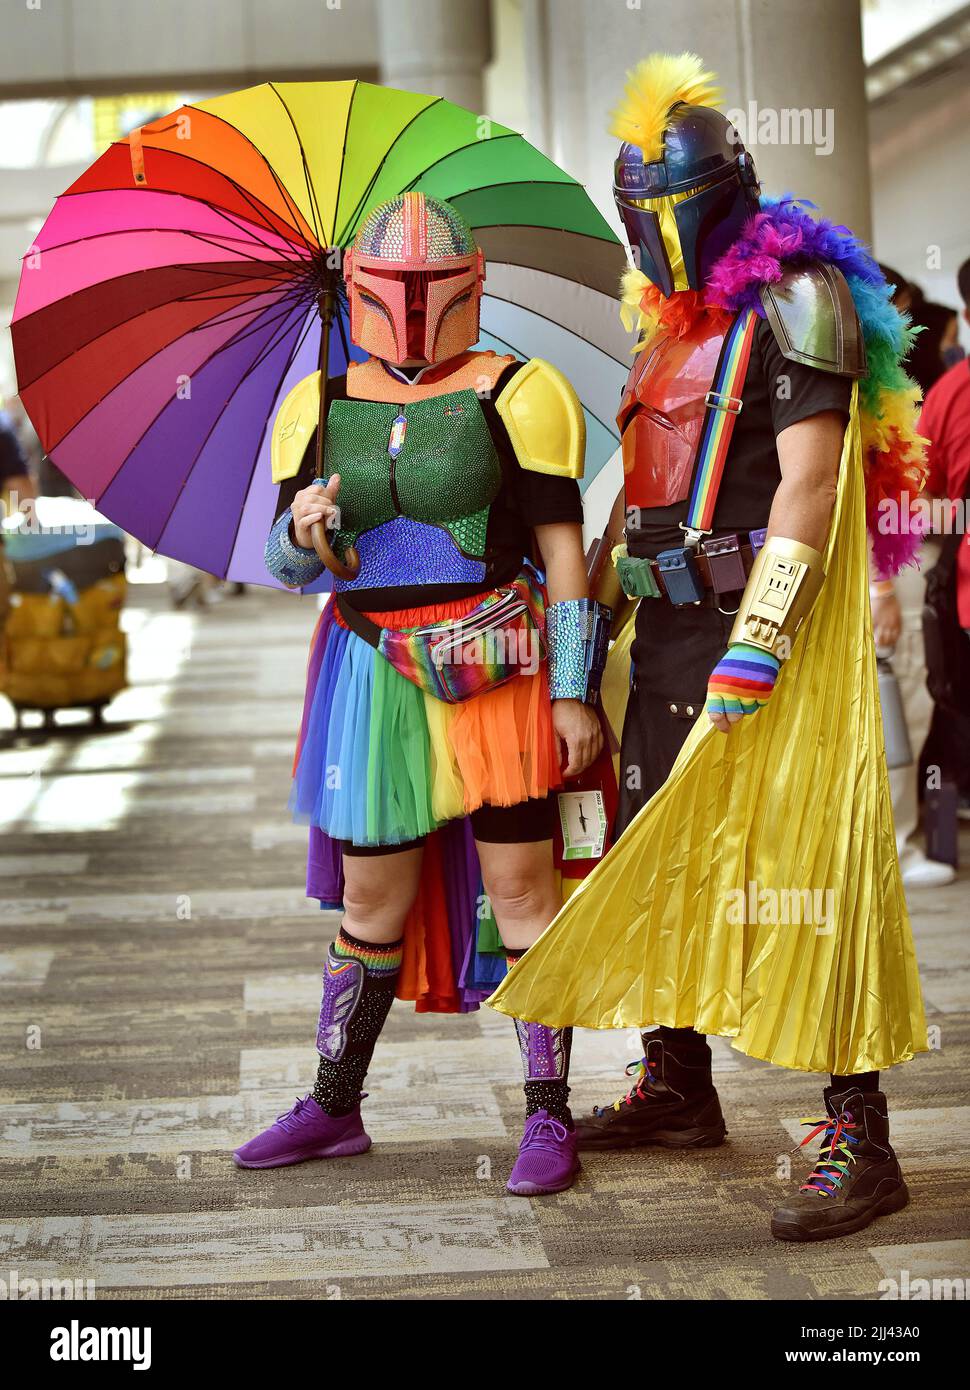 san-diego-usa-22nd-july-2022-fans-shawn-richter-r-and-lisa-lower-cosplaying-pride-mandalorians...jpg